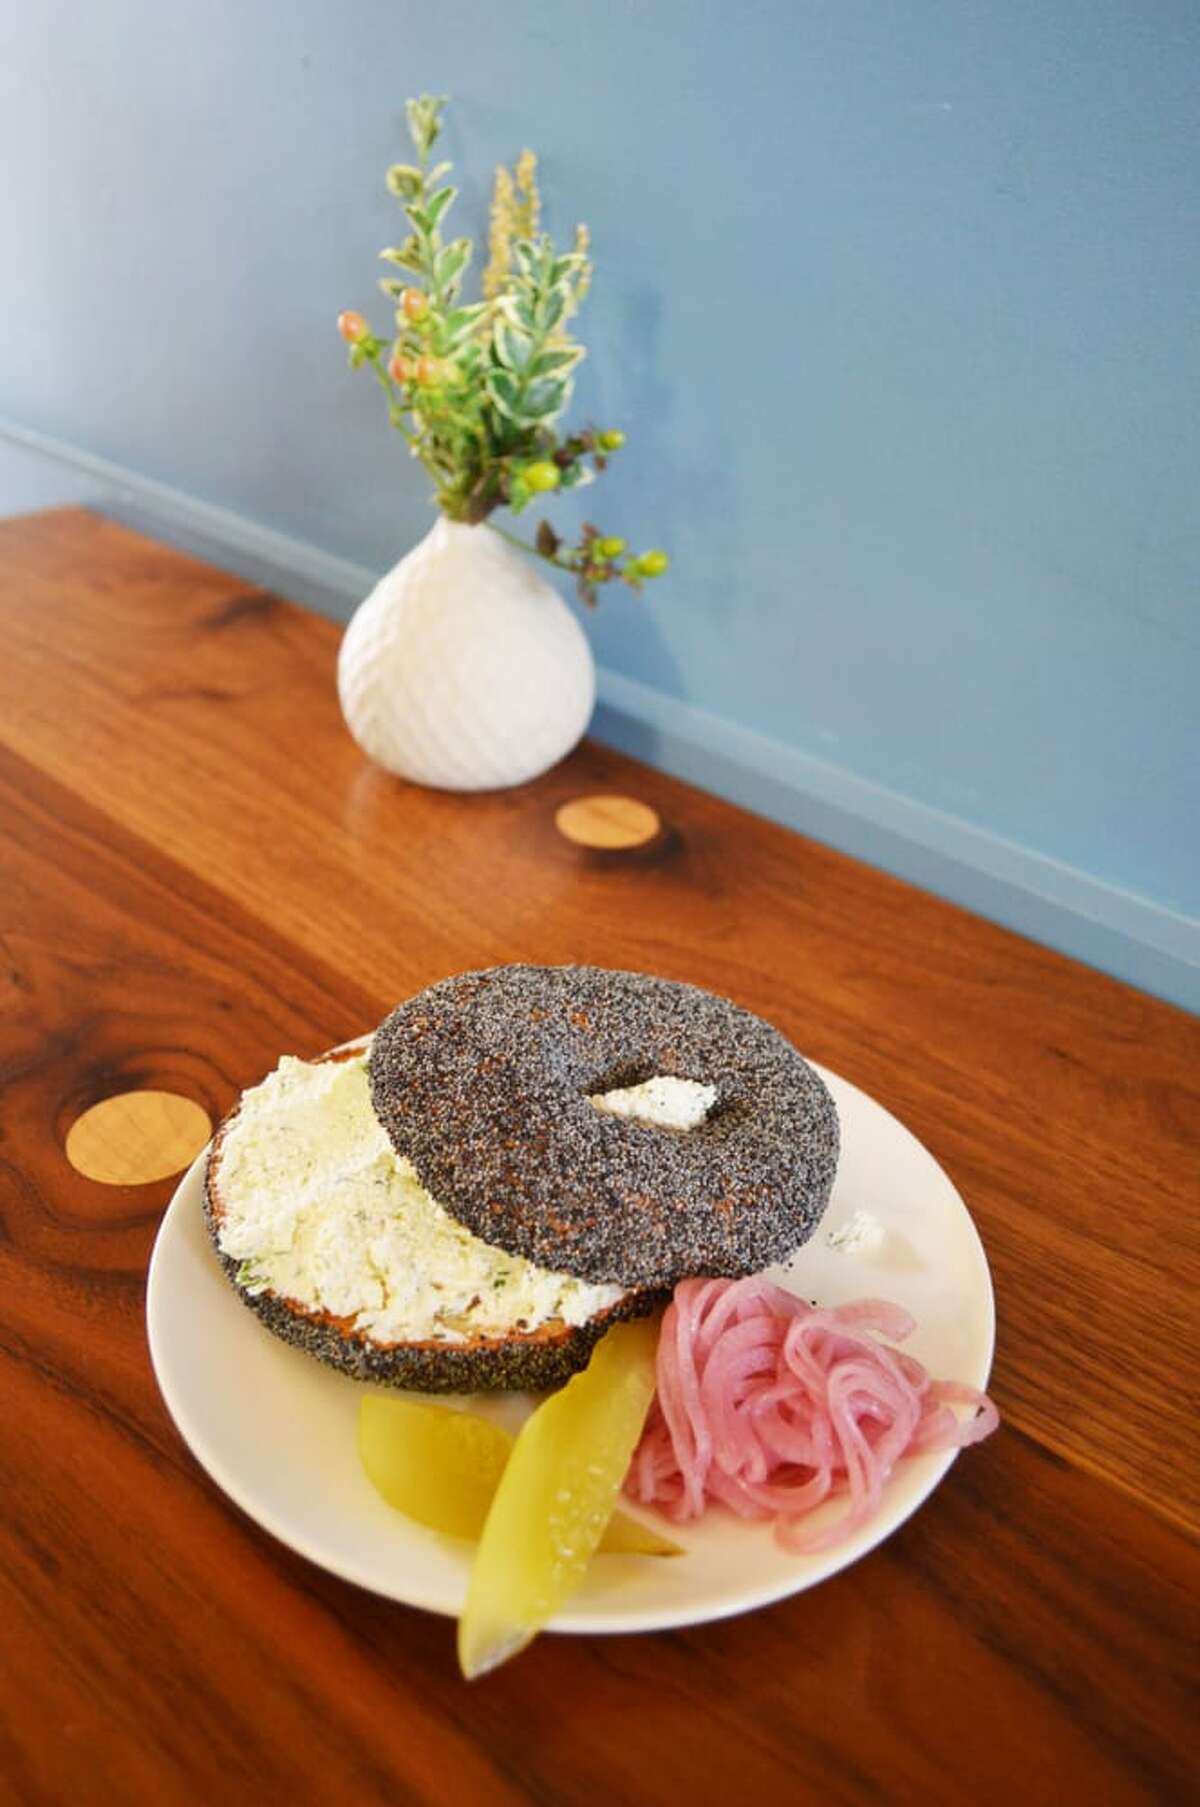 Nicolette Manescalchi (Executive Chef, A16) Bagel from Marla Bakery "This is a tough question as I have a 1 year old son and that has put a big halt on my dining out.  Due to my current lifestyle which is consumed with work and baby, I'd have to say the thing I eat out the most and always enjoy are the bagels from Marla Bakery. "I love that the bagels are coated in seeds.  The poppy seed, sesame seed and multi seed are all great.  They also have a wonderful texture.  They have house made farmer's cheese that comes with the bagels as well as smoked or cured McFarland Springs trout which I love.  It's great to have a neighborhood bakery that uses the same quality and care in their ingredients and preparation that we use at A16." Marla Bakery, 3619 Balboa St, San Francisco. (415) 742-4379. A16, 2355 Chestnut Street, San Francisco. (415) 771-2216.